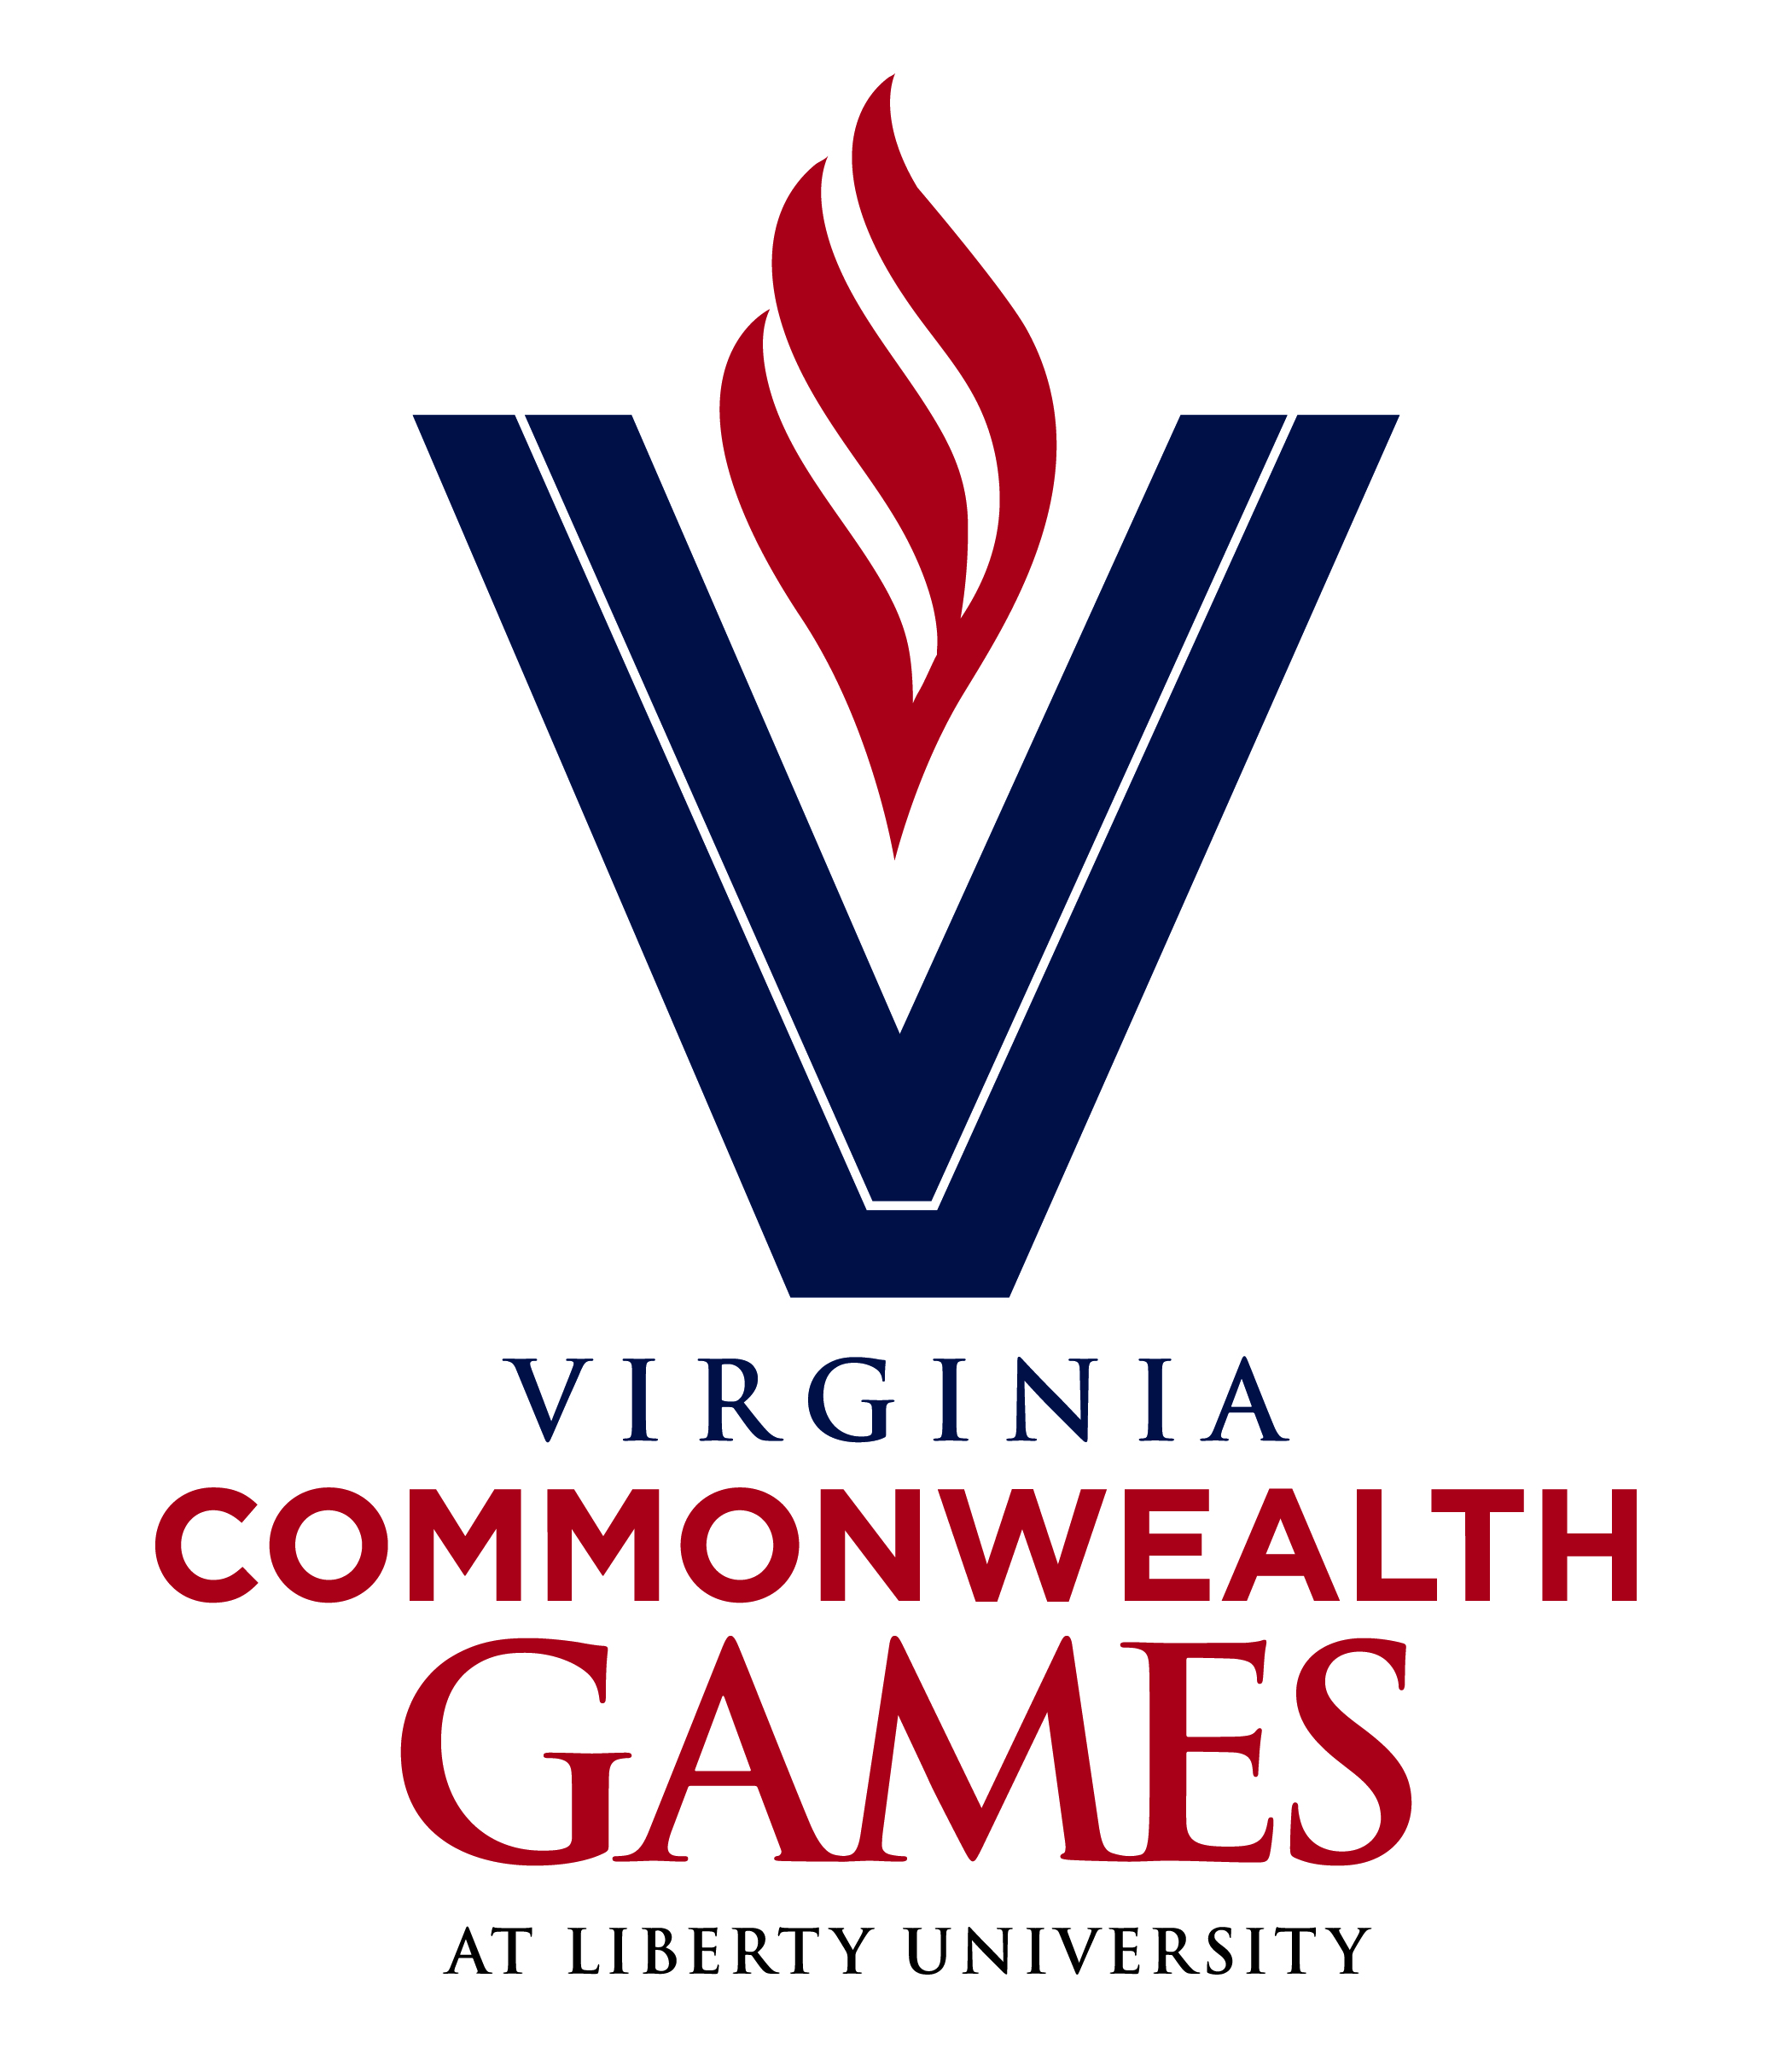 The new logo for the Virginia Commonwealth Games, presented by Liberty University, was revealed on Wednesday, Oct. 7, 2015.